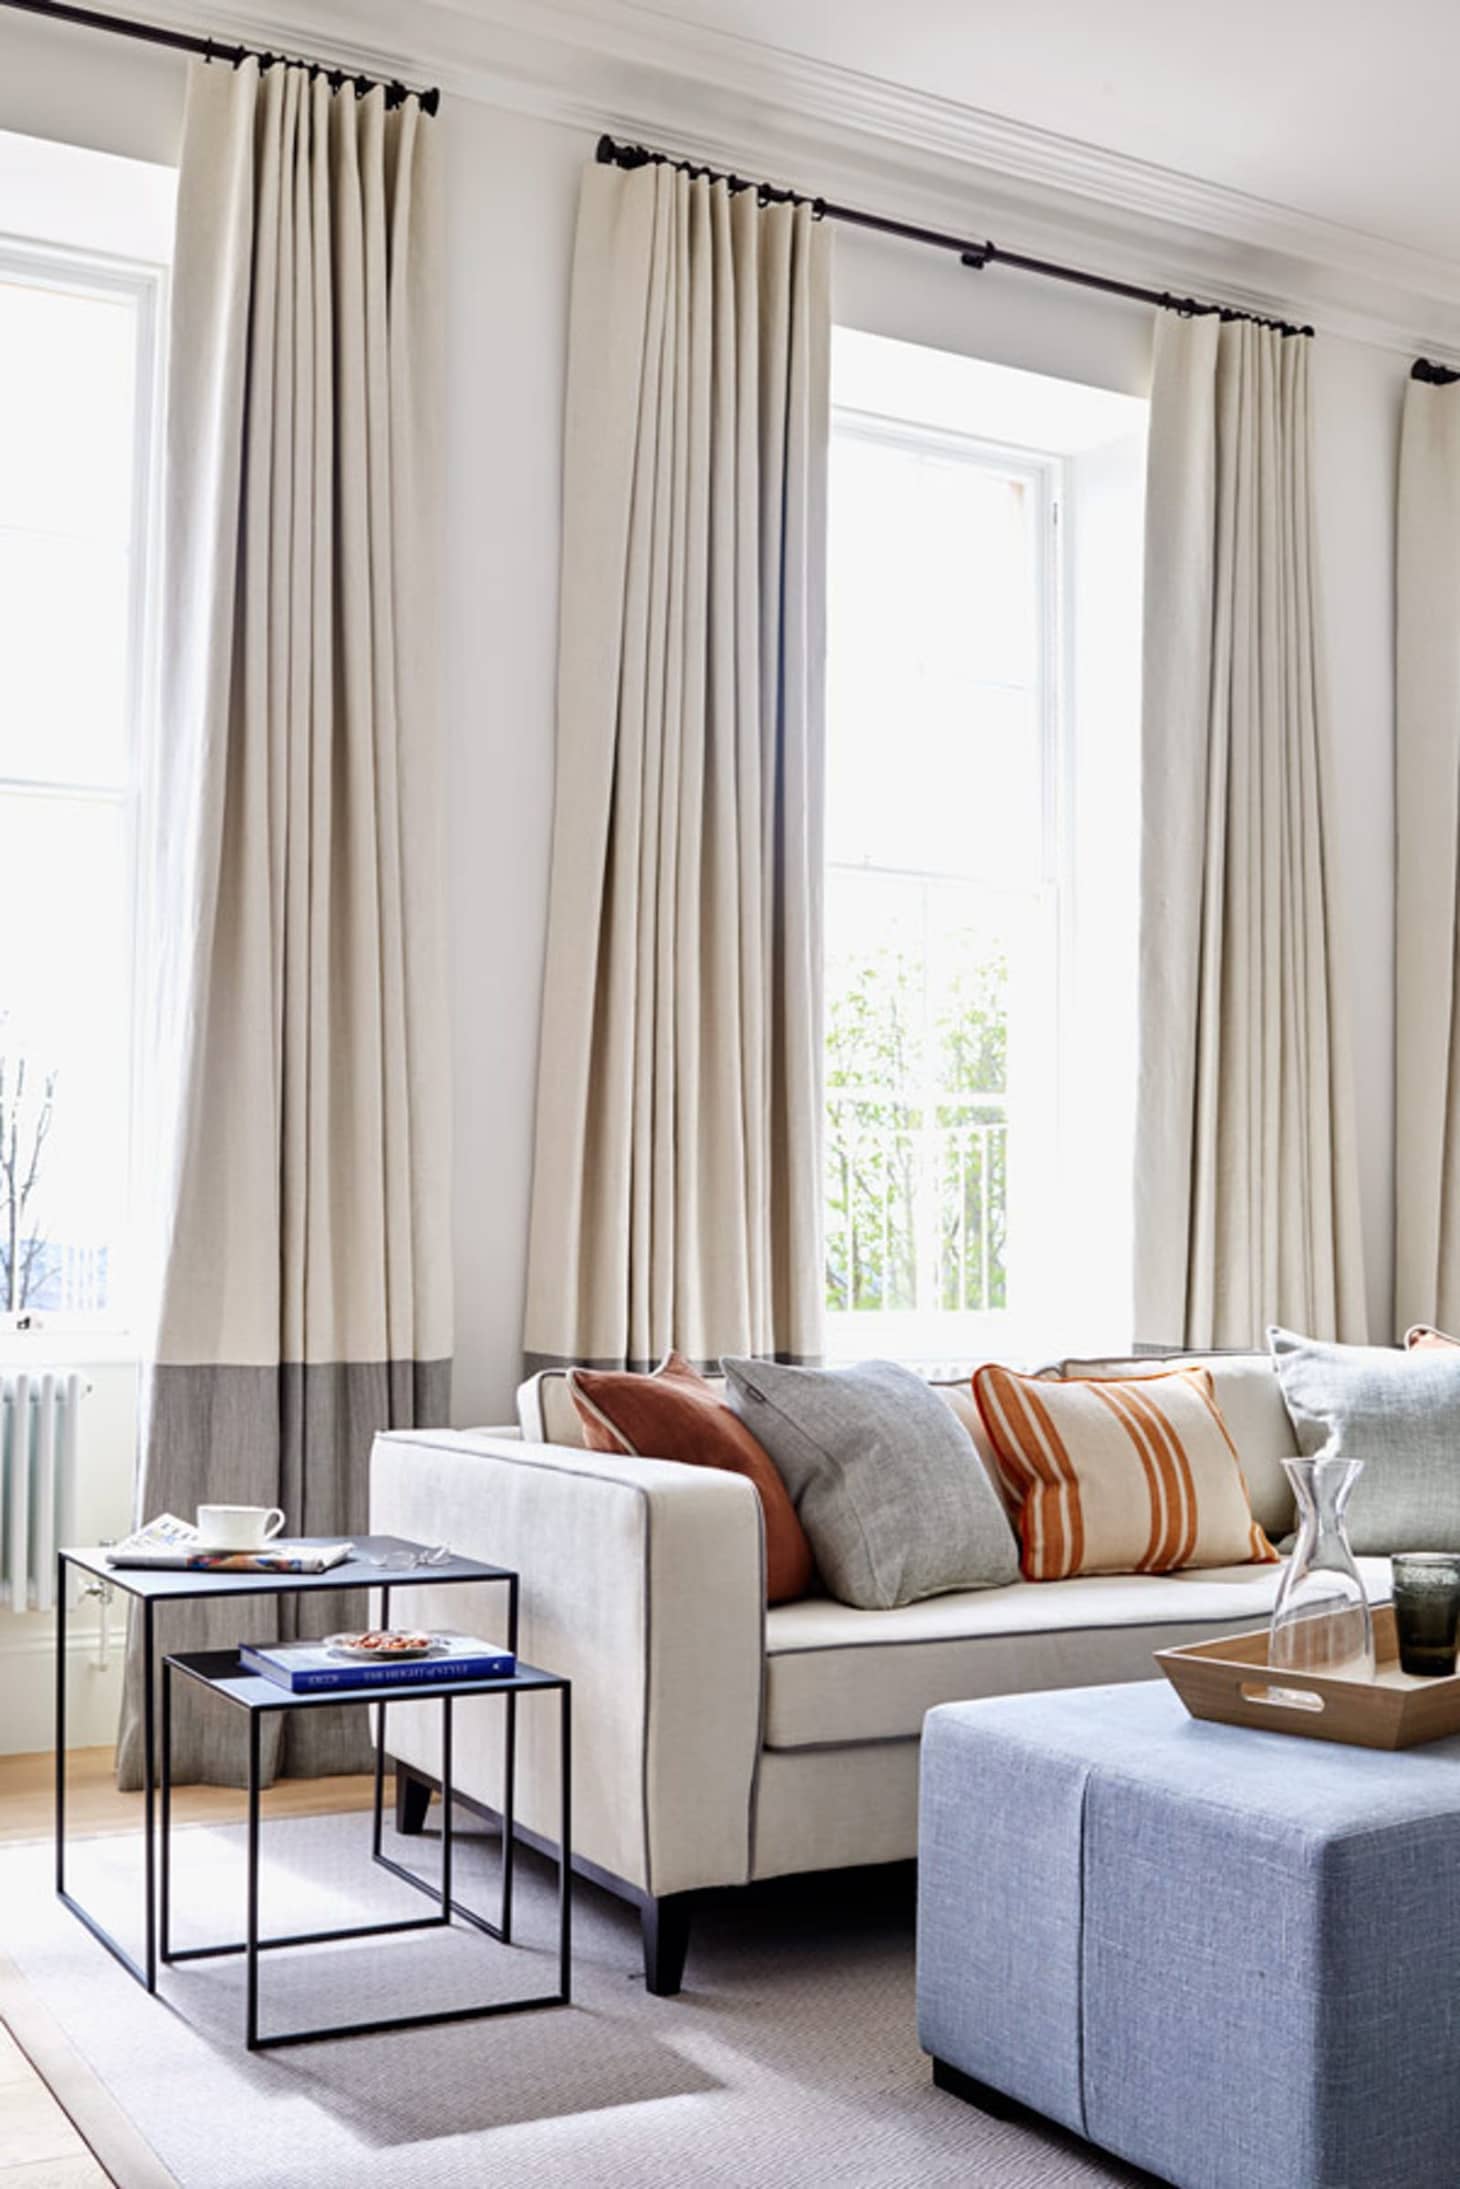 DIY Ideas for Upgrading Plain Curtains | Apartment Therapy